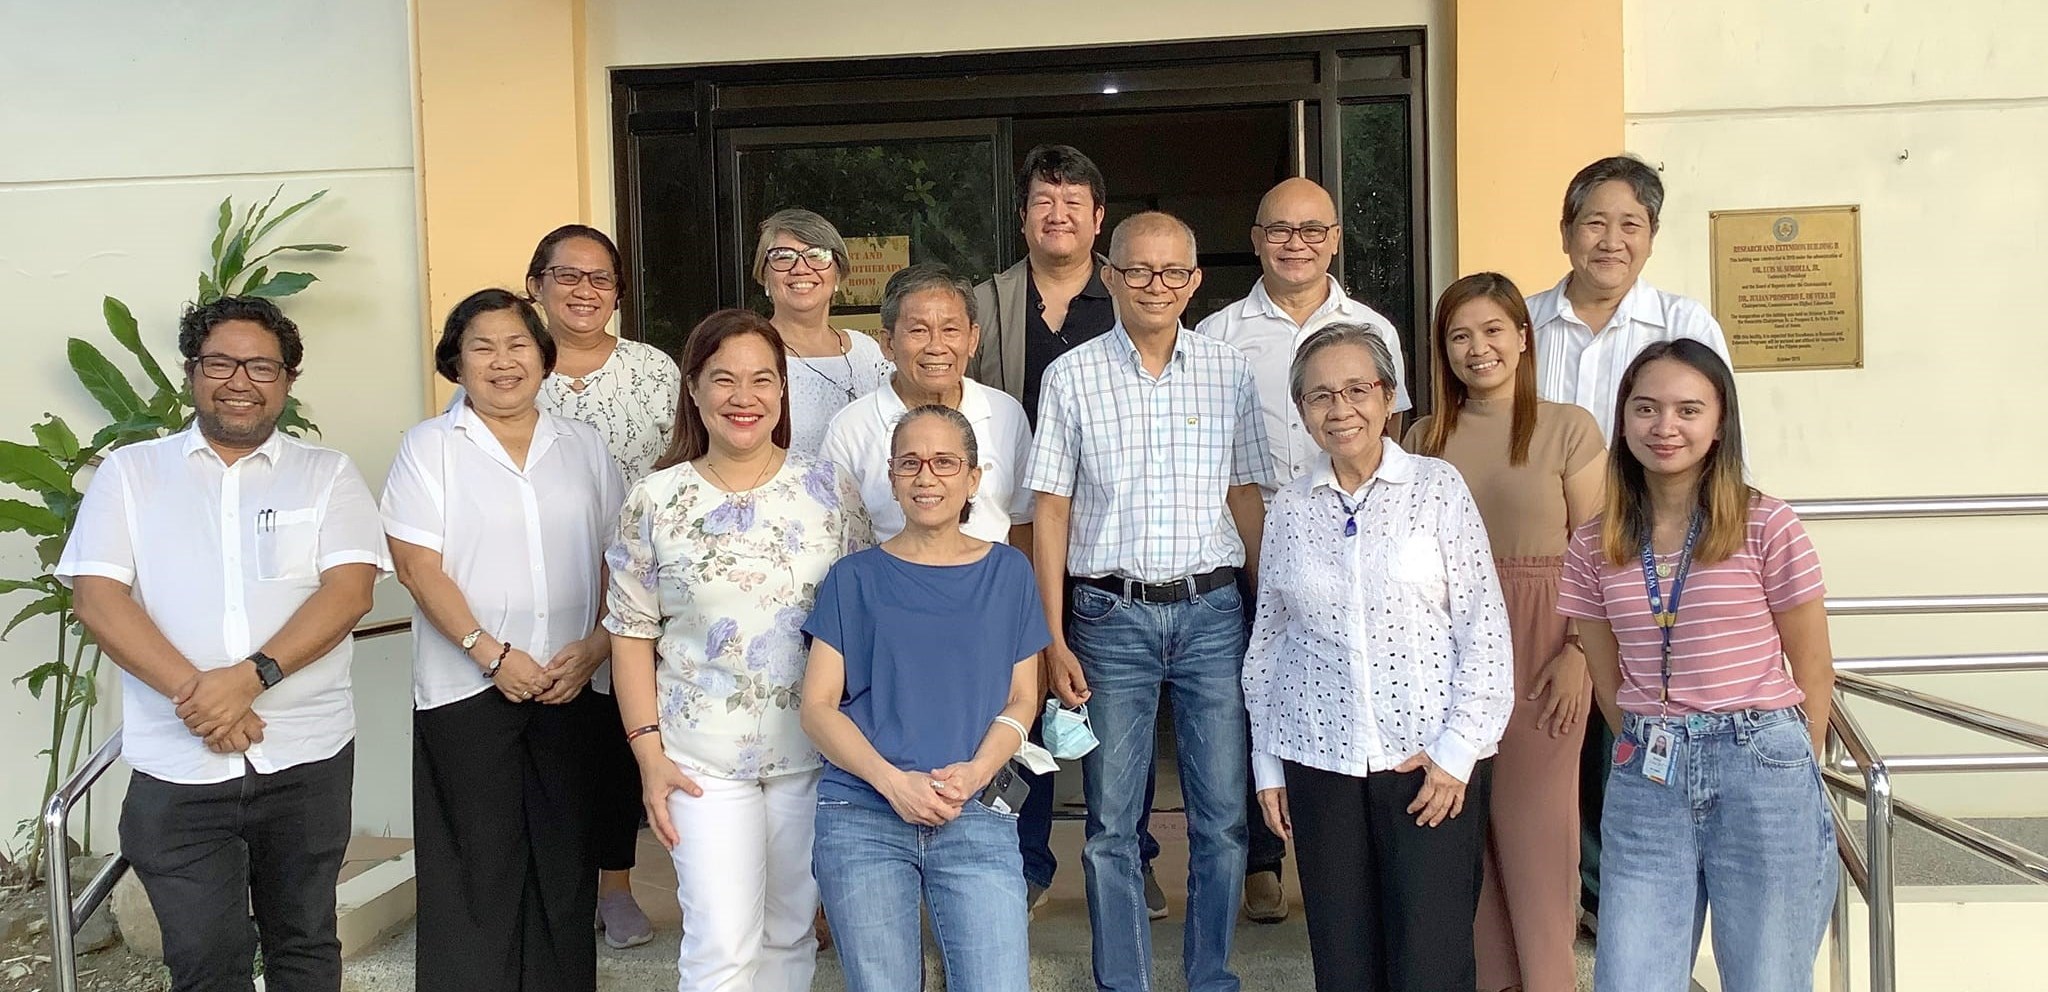 batangas medical center research ethics review committee